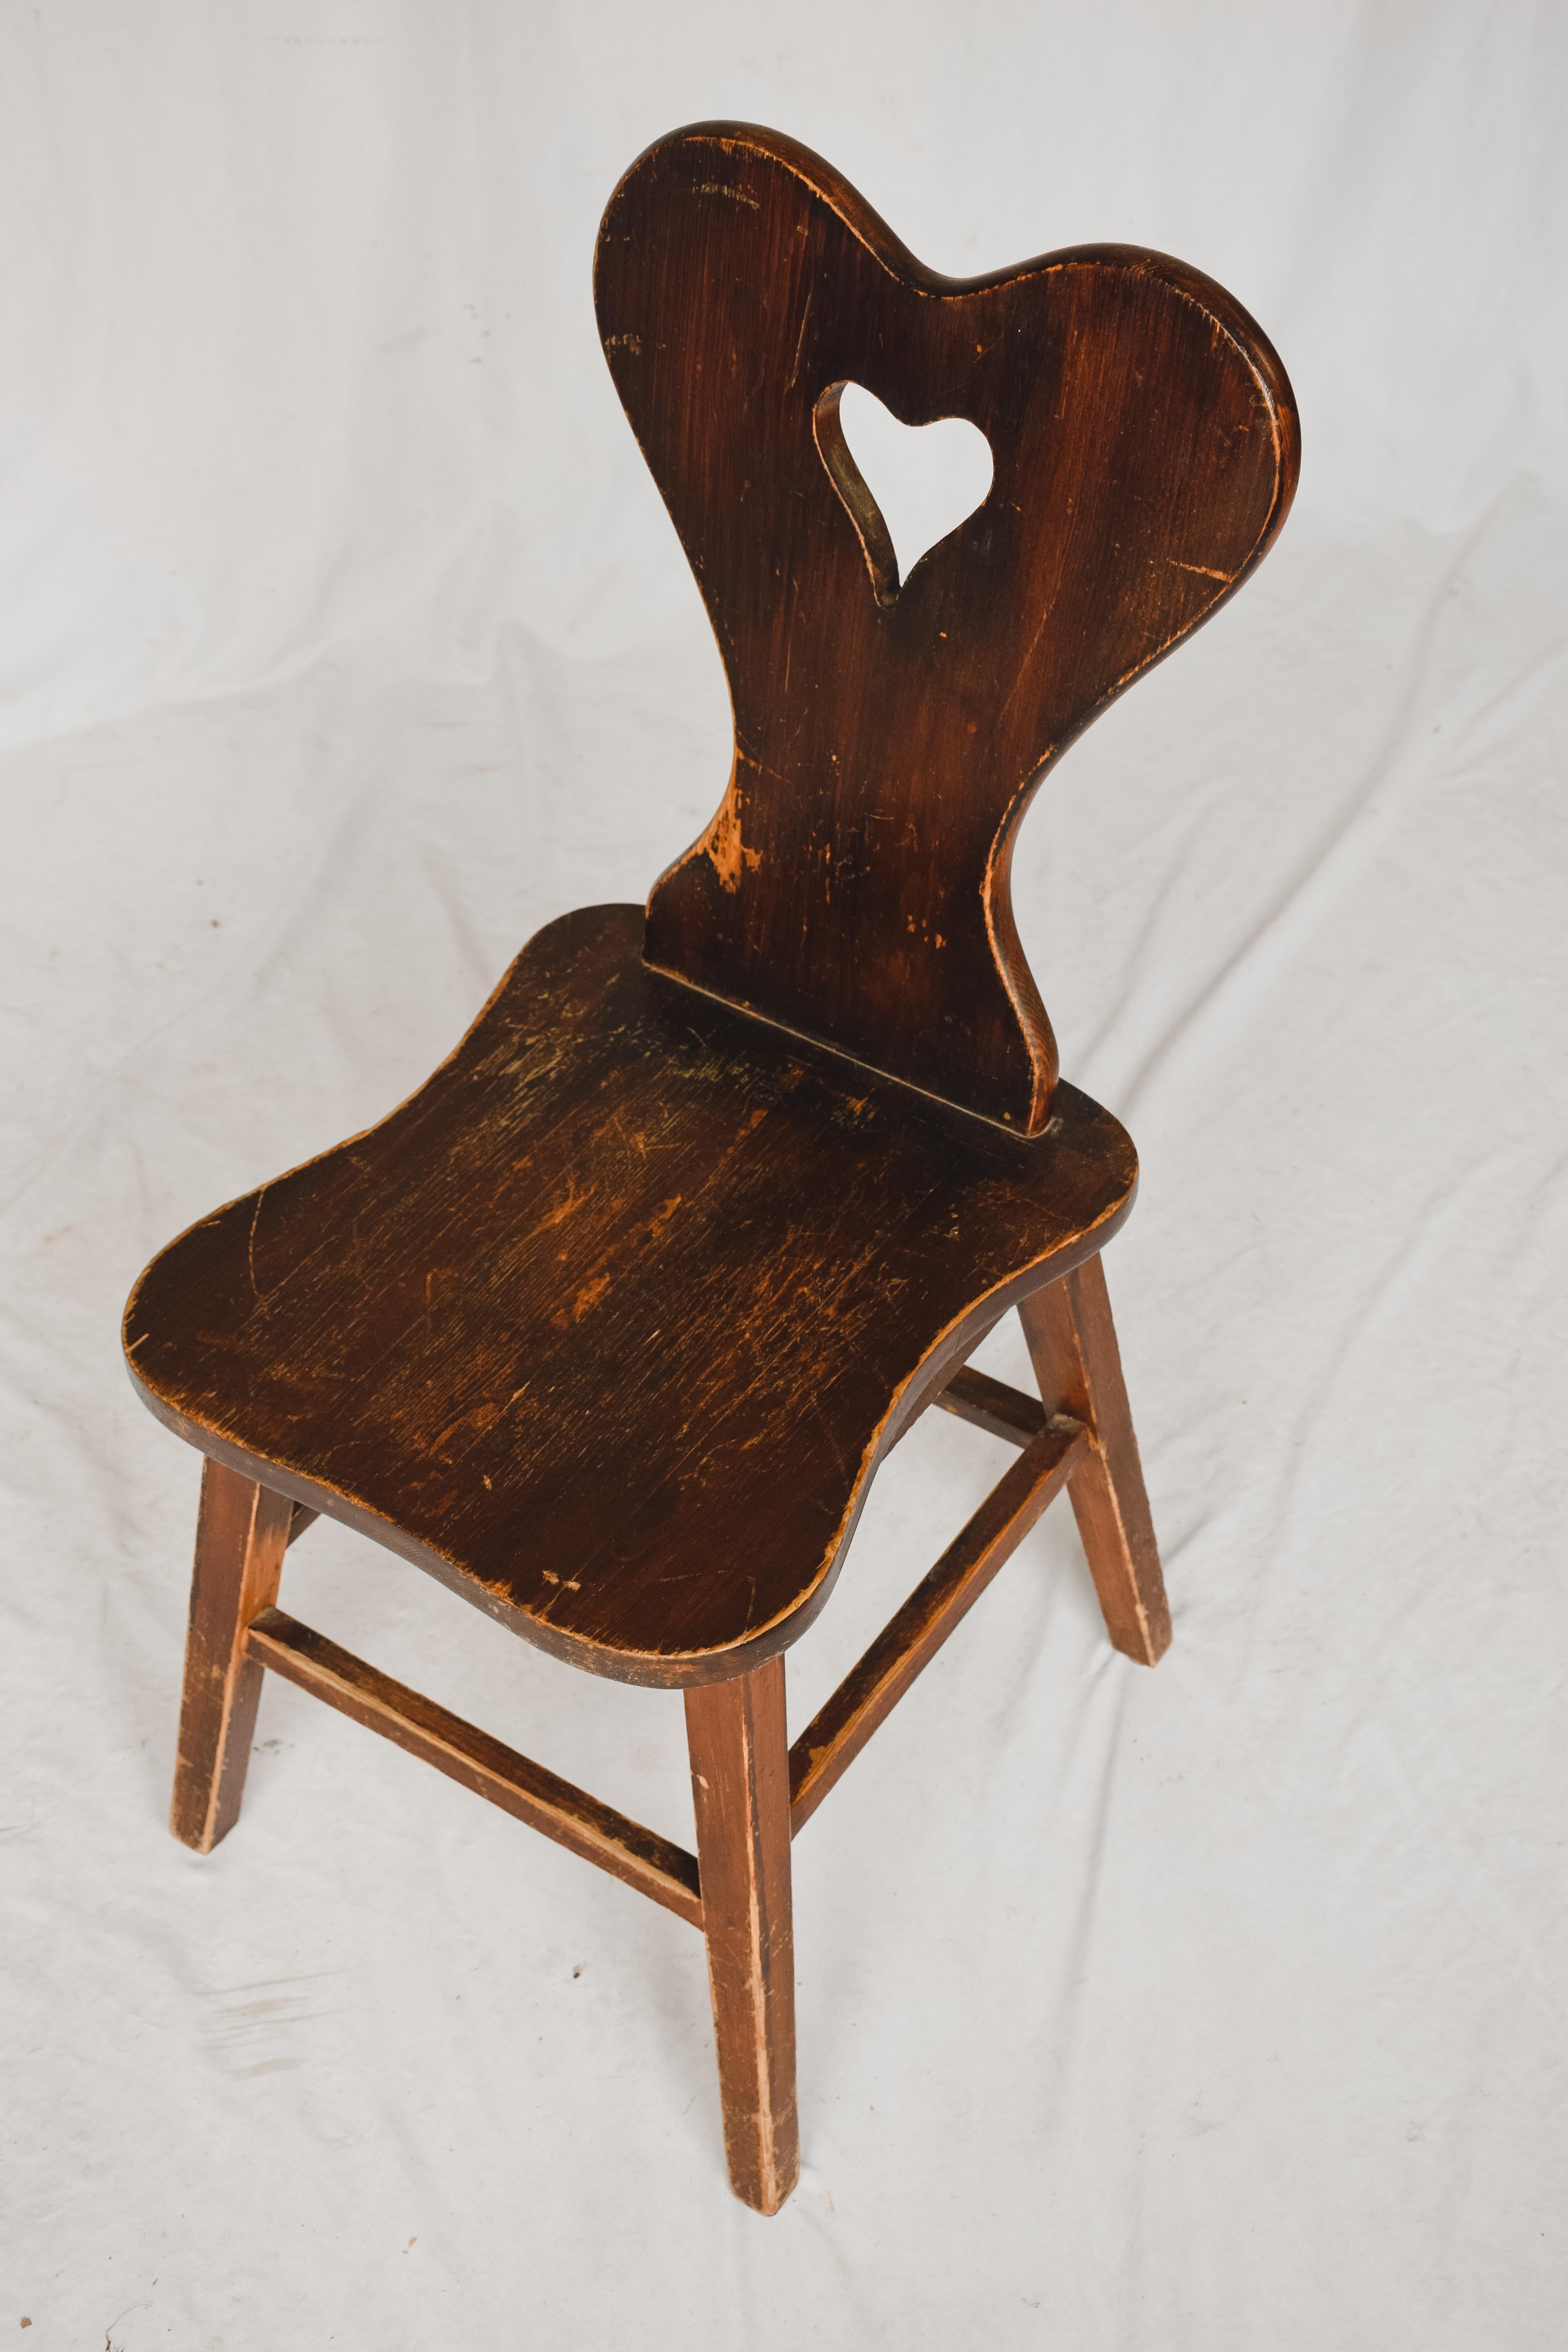 Rustic and simple these Wooden chairs with an open heart carved in the back are the perfect companion to any desk or entry table. Purchased in Europe these wooden chairs almost mirror the milking chairs found in all over the Netherlands. This chair